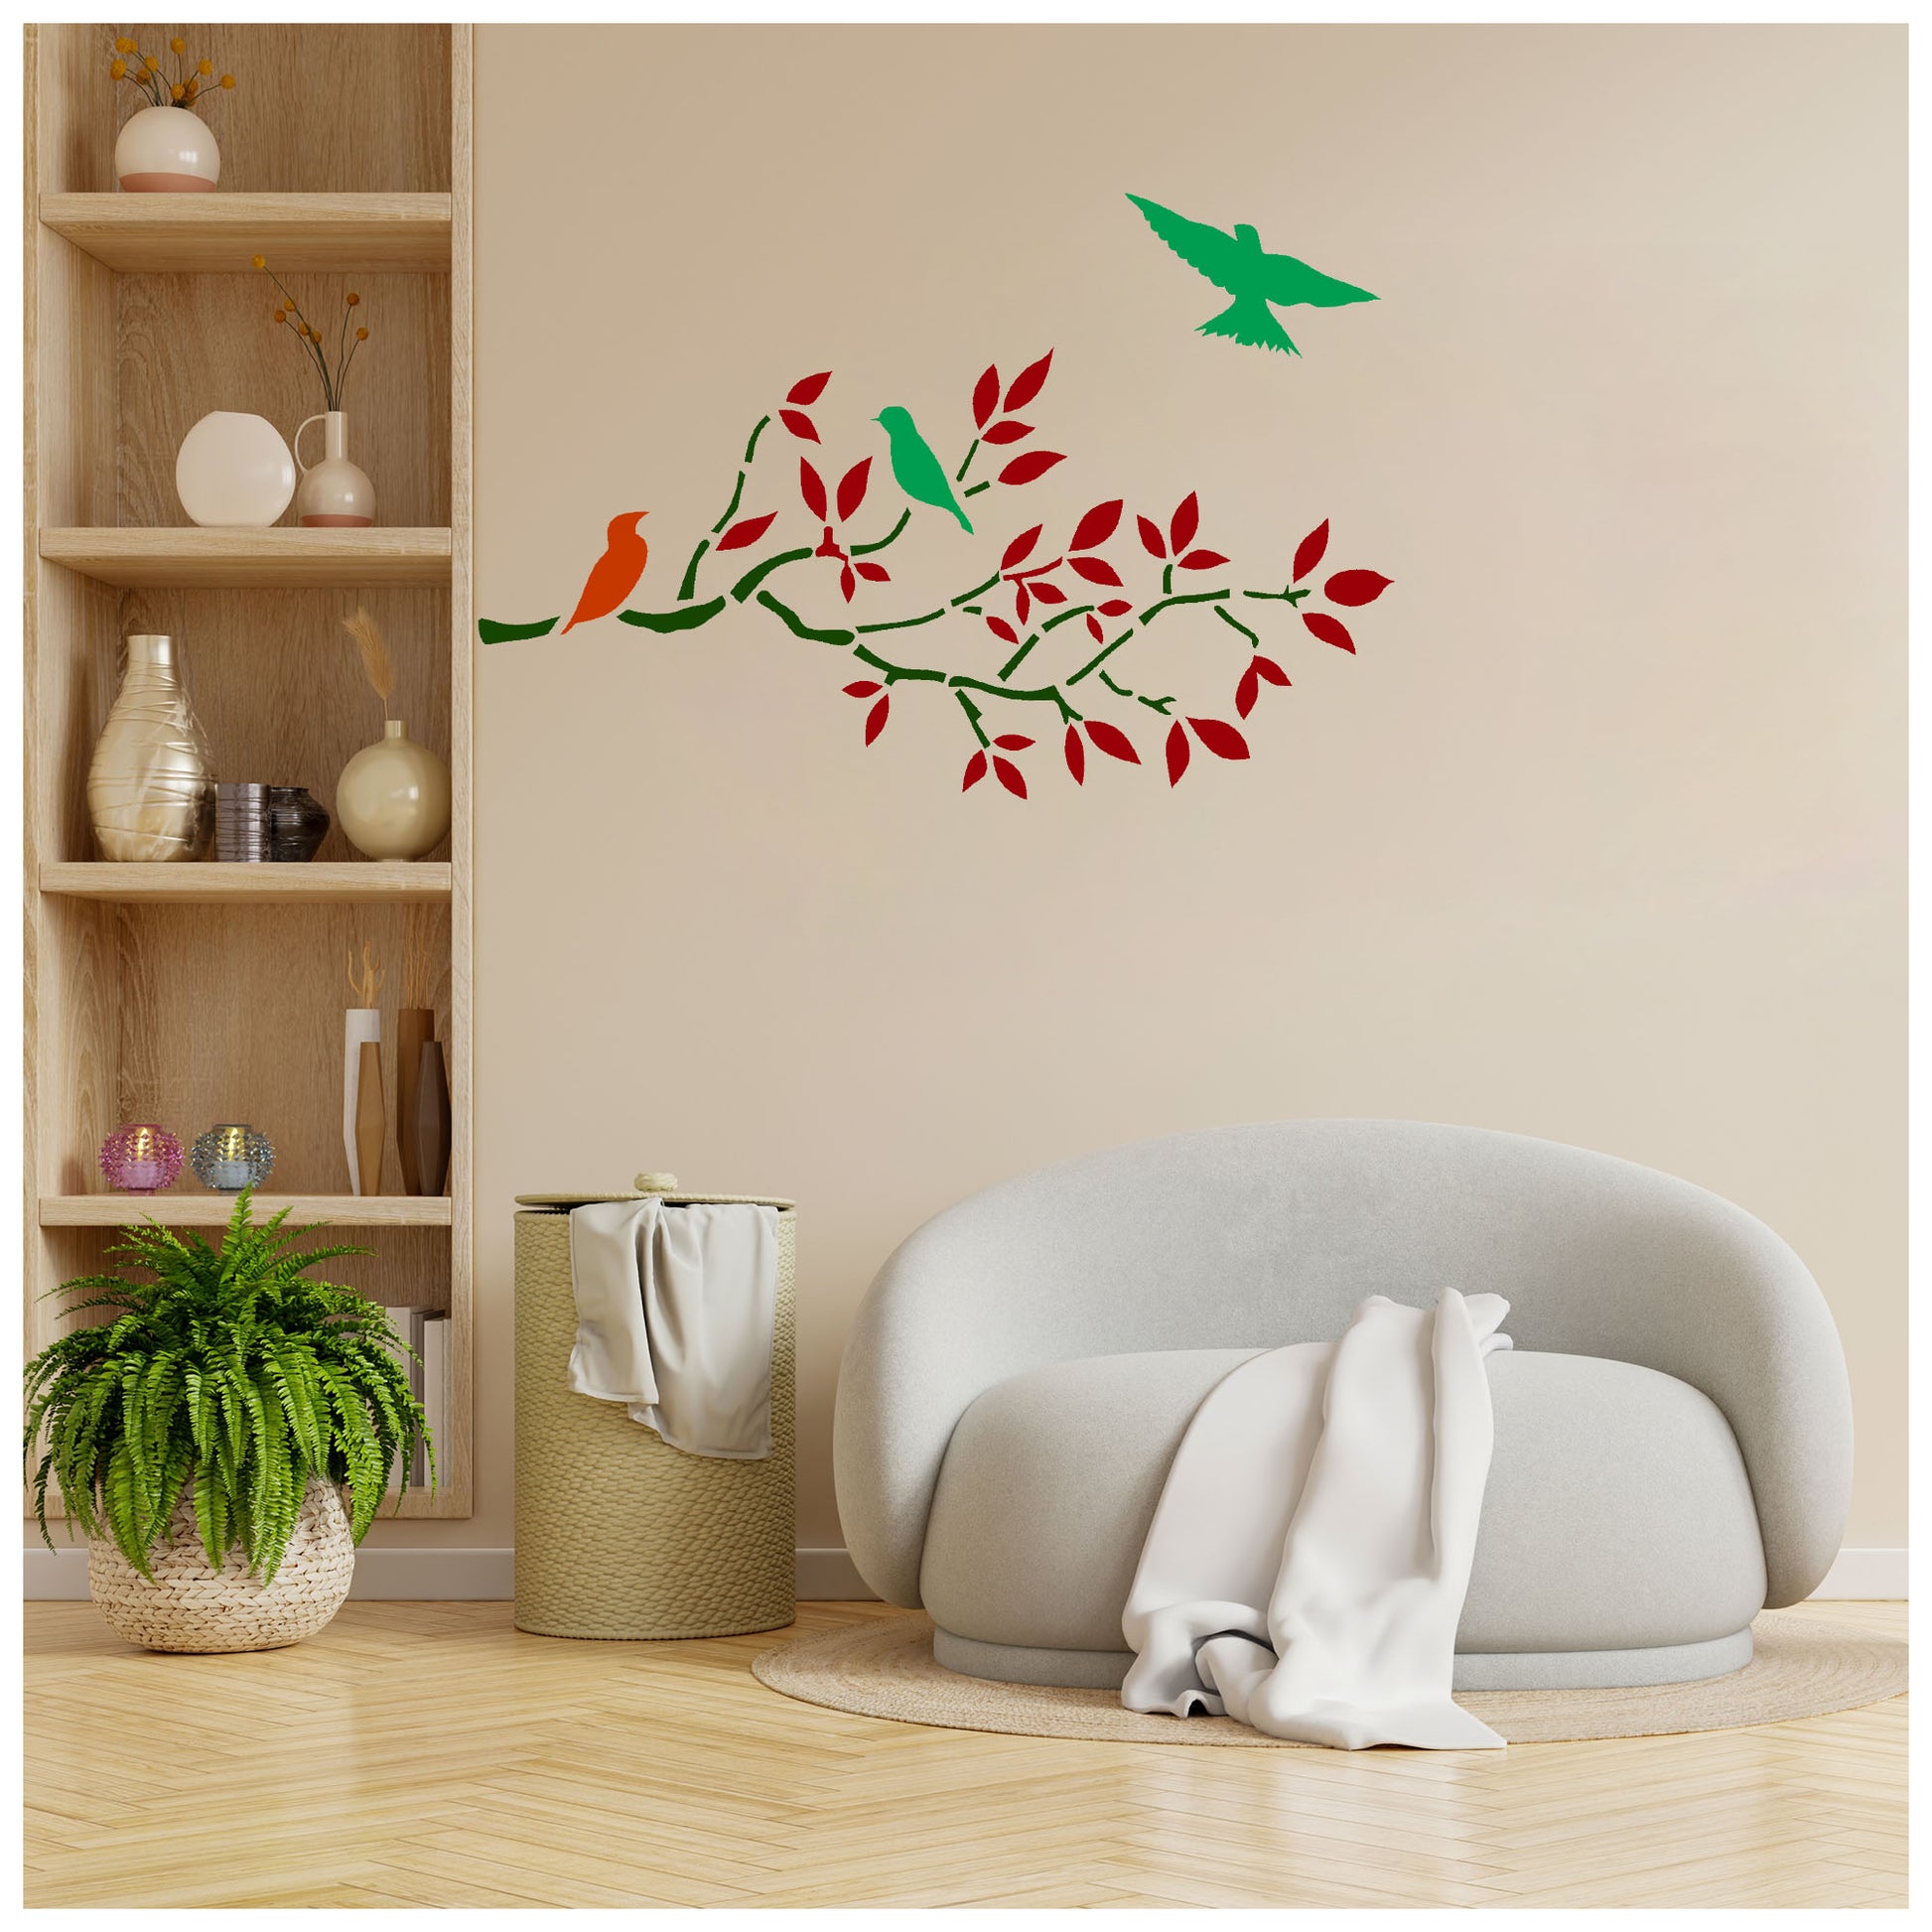 Kayra Decor Bird on Tree Branch Wall Design Stencils for Wall Painting for  Home Wall Decoration � Suitable for Room Decor, Ceiling, Craft and Floors  (16 inch x 24 inch) (KHS390) KHS390